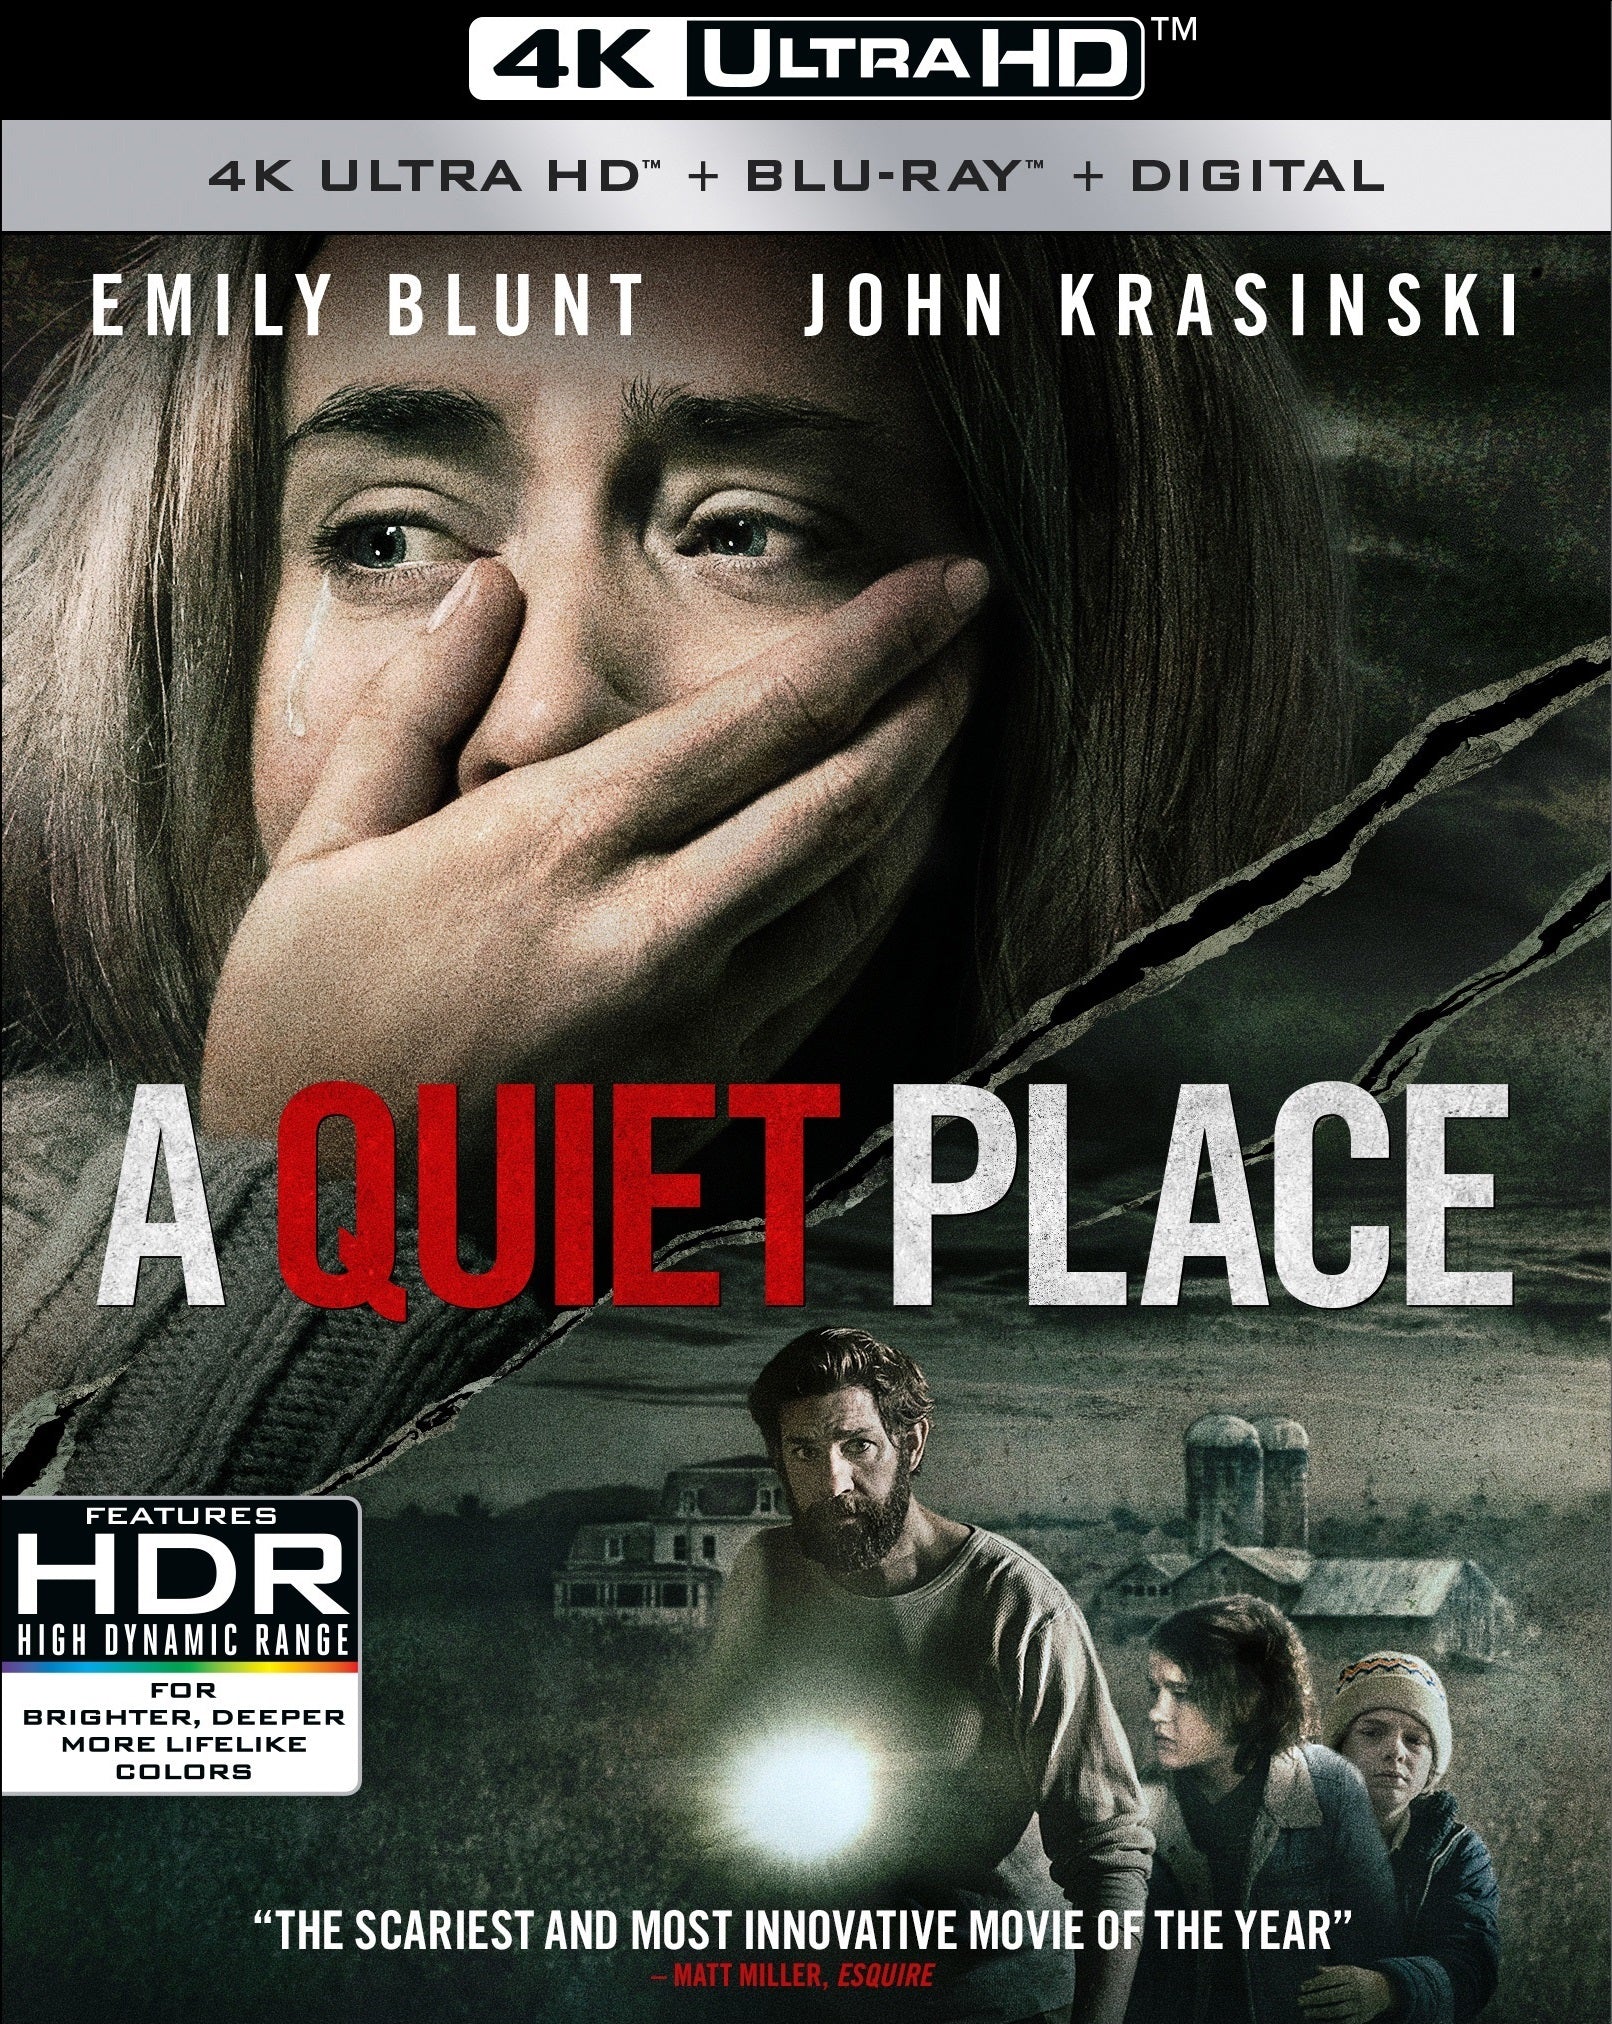 A QUIET PLACE 4K UHD/BLU-RAY